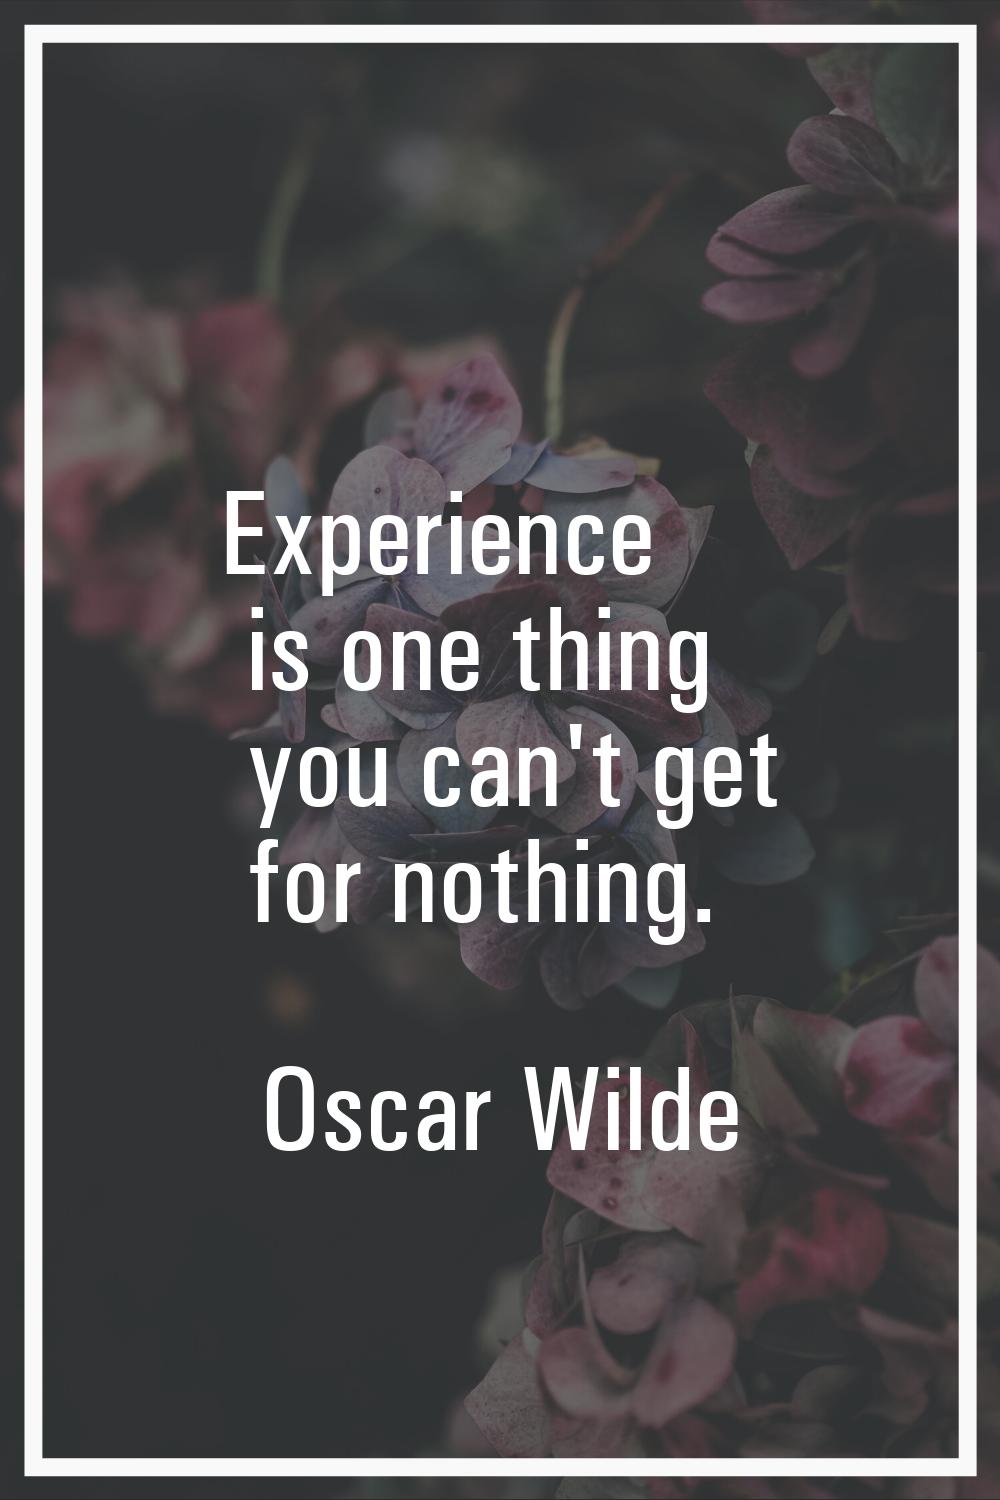 Experience is one thing you can't get for nothing.